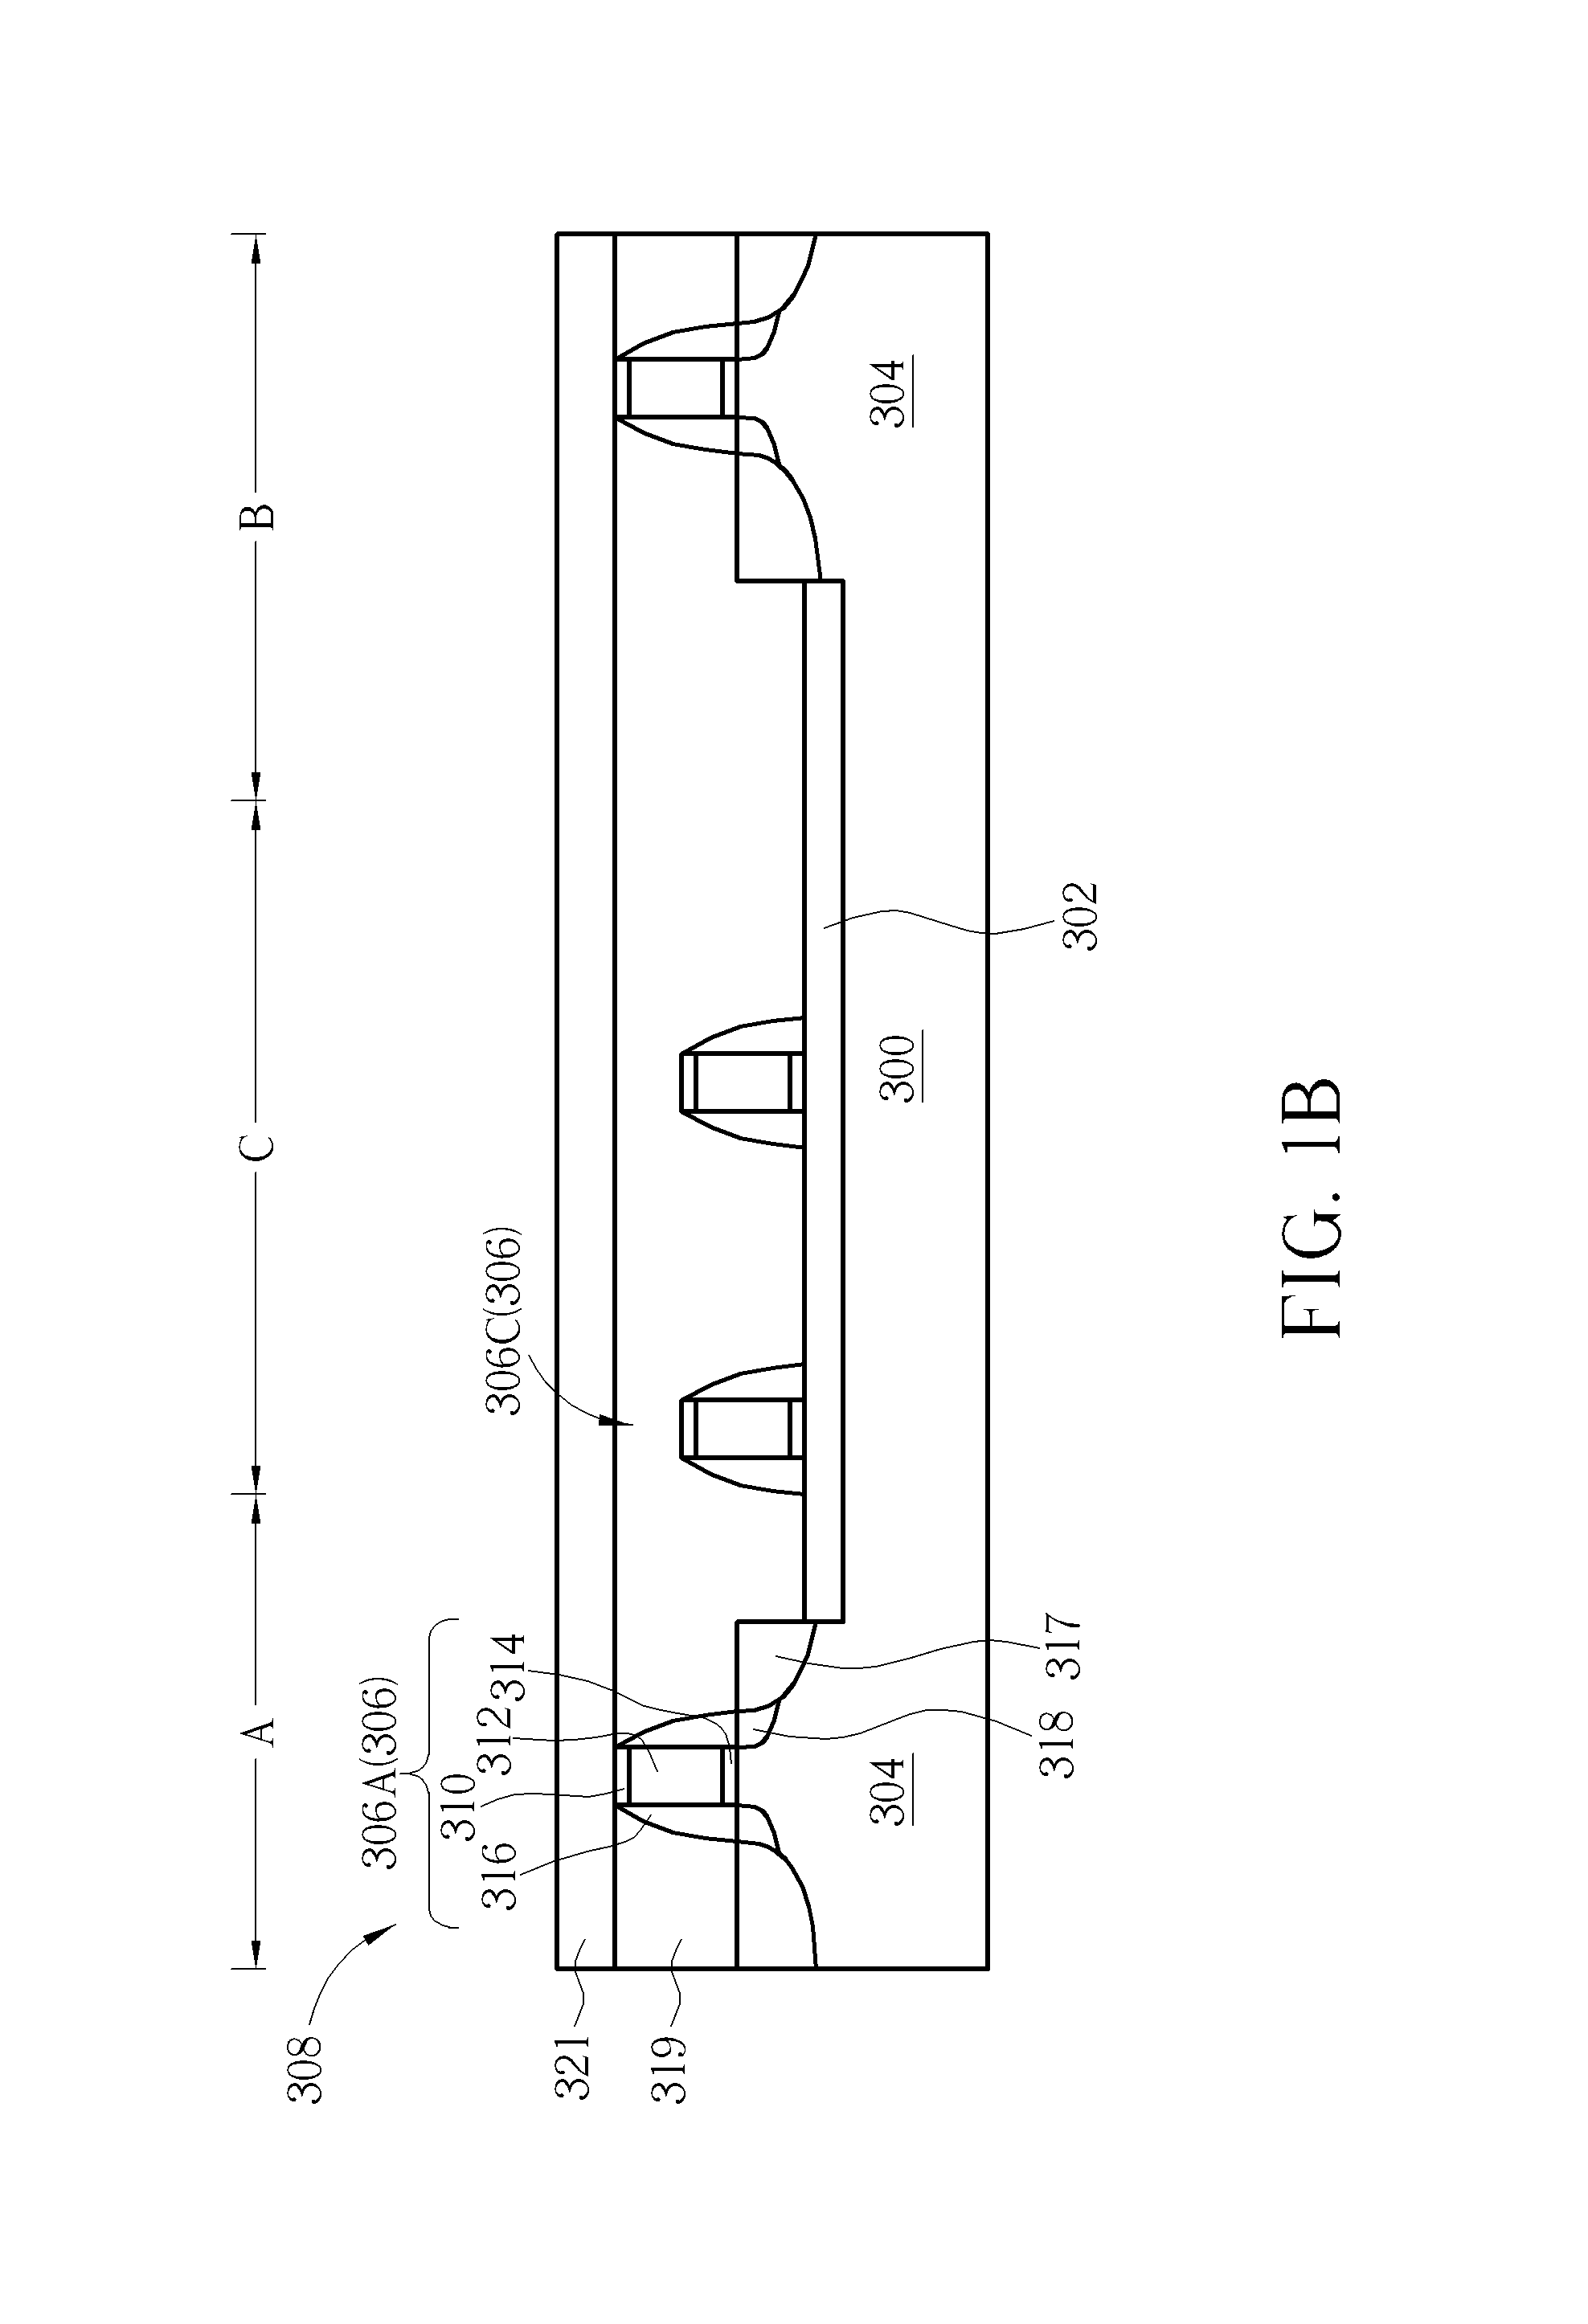 Semiconductor structure having a center dummy region